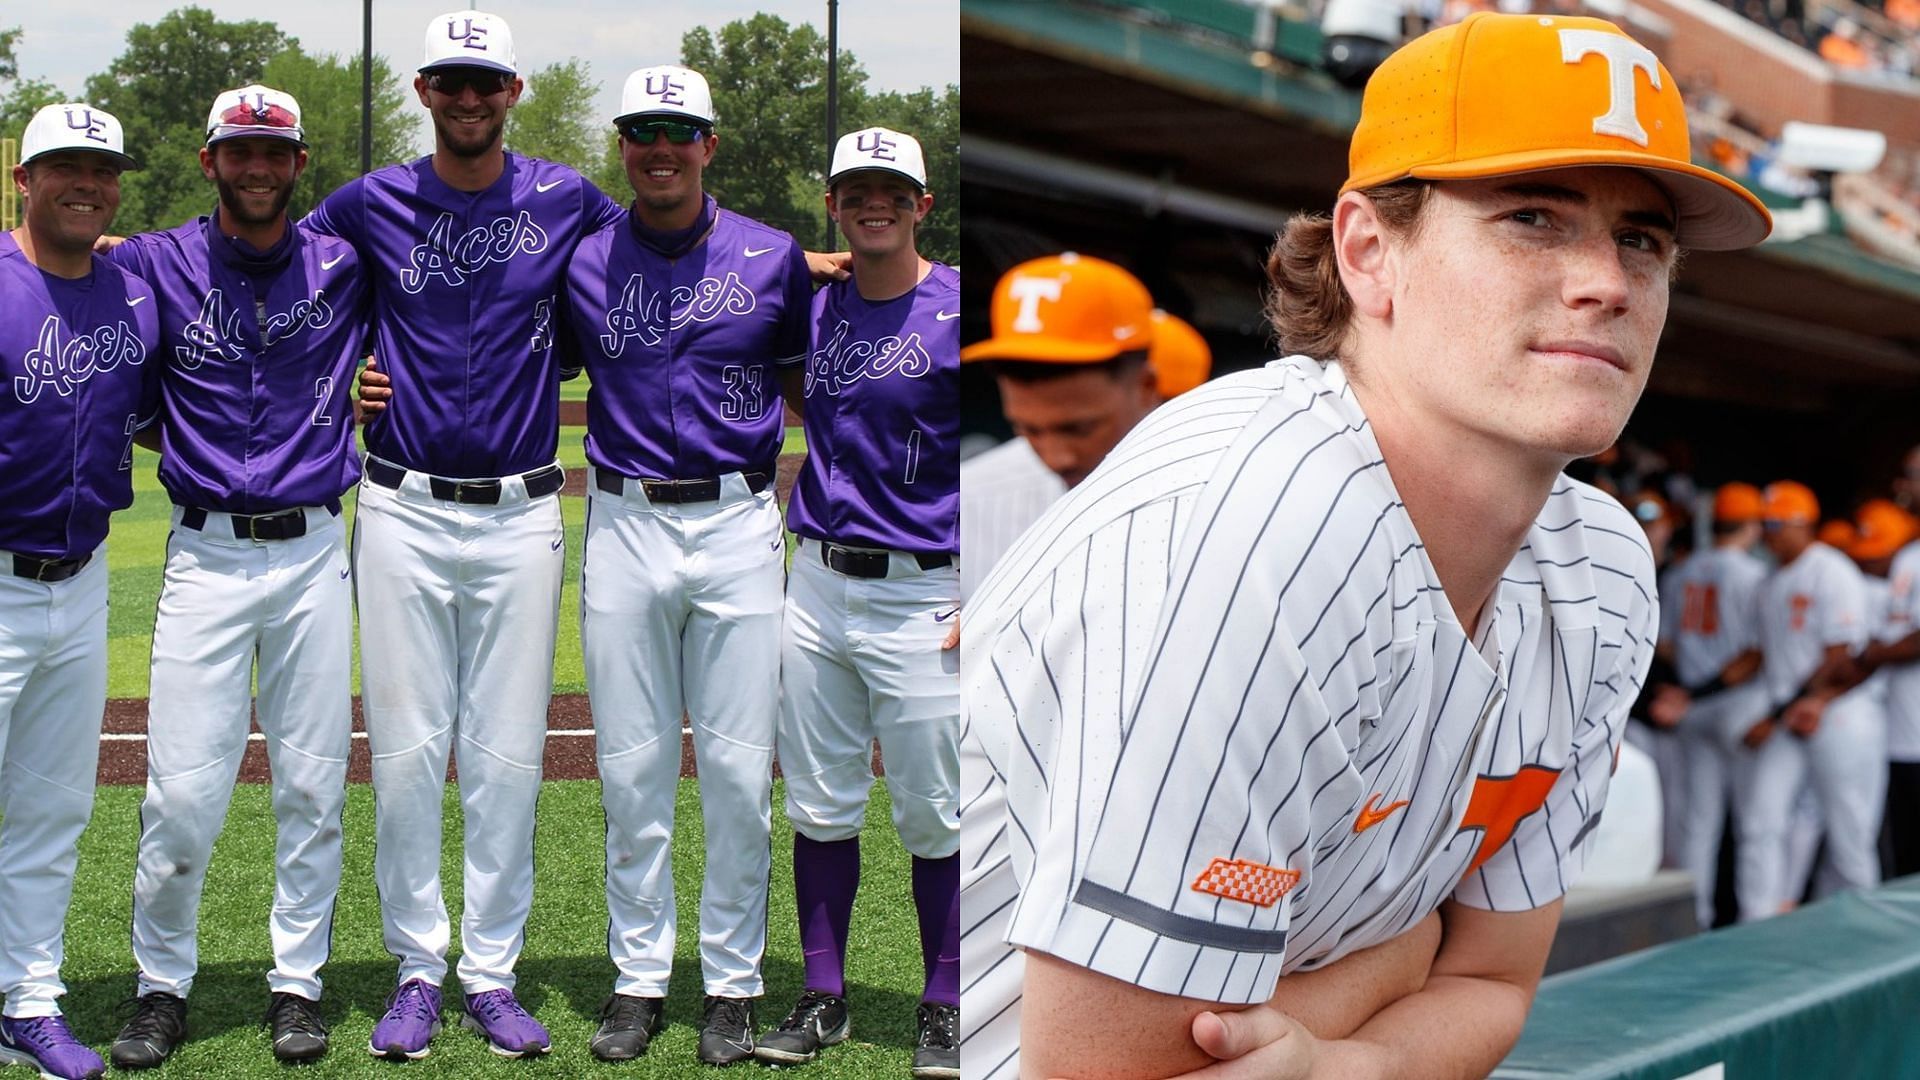 Images courtesy of Evansville and Tennessee Athletics